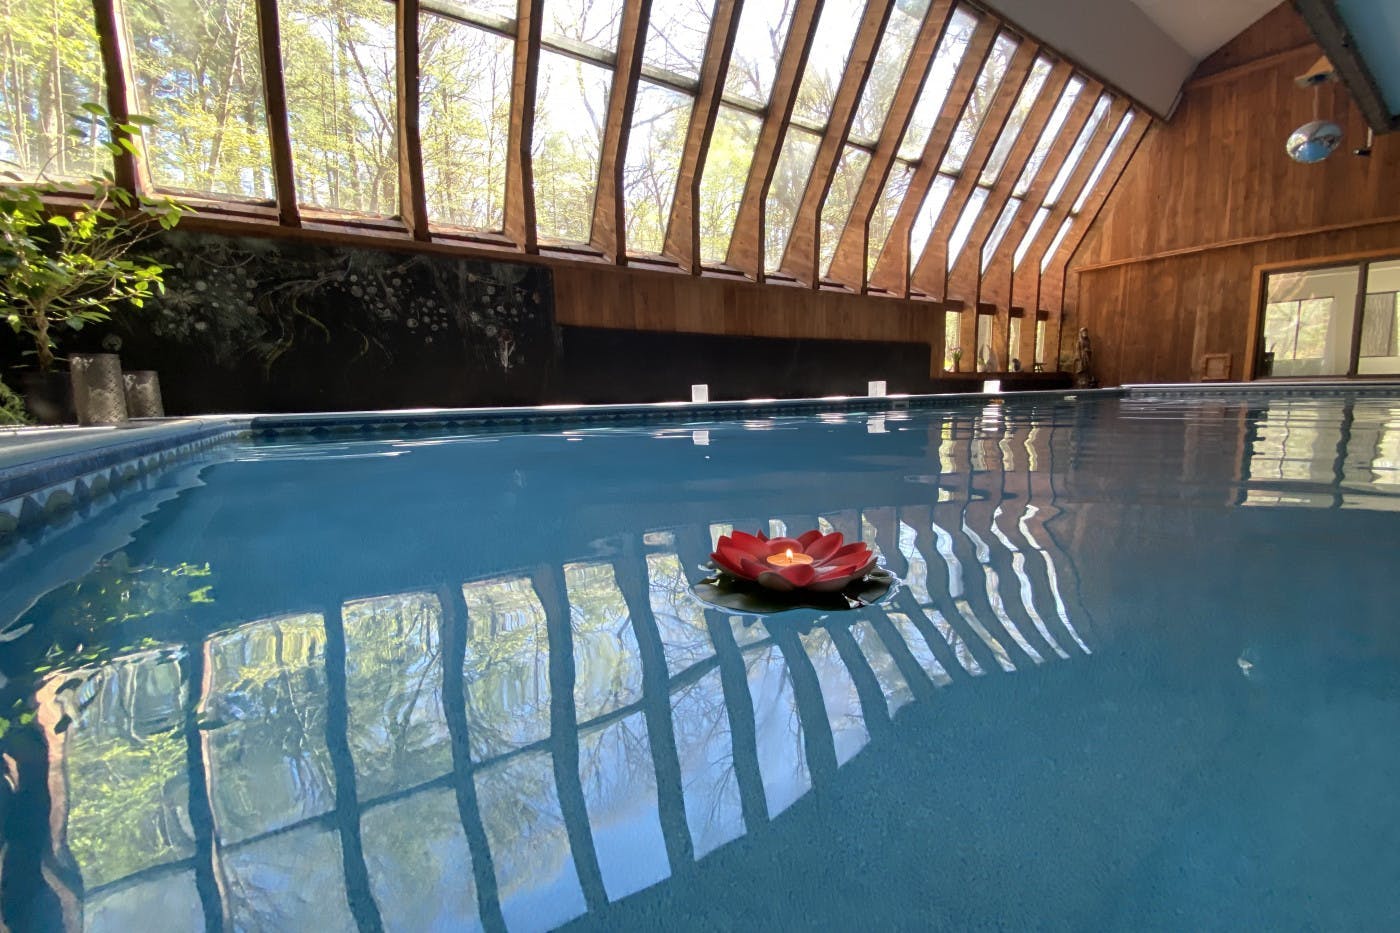 Magical Indoor Heated Pool in the Woods